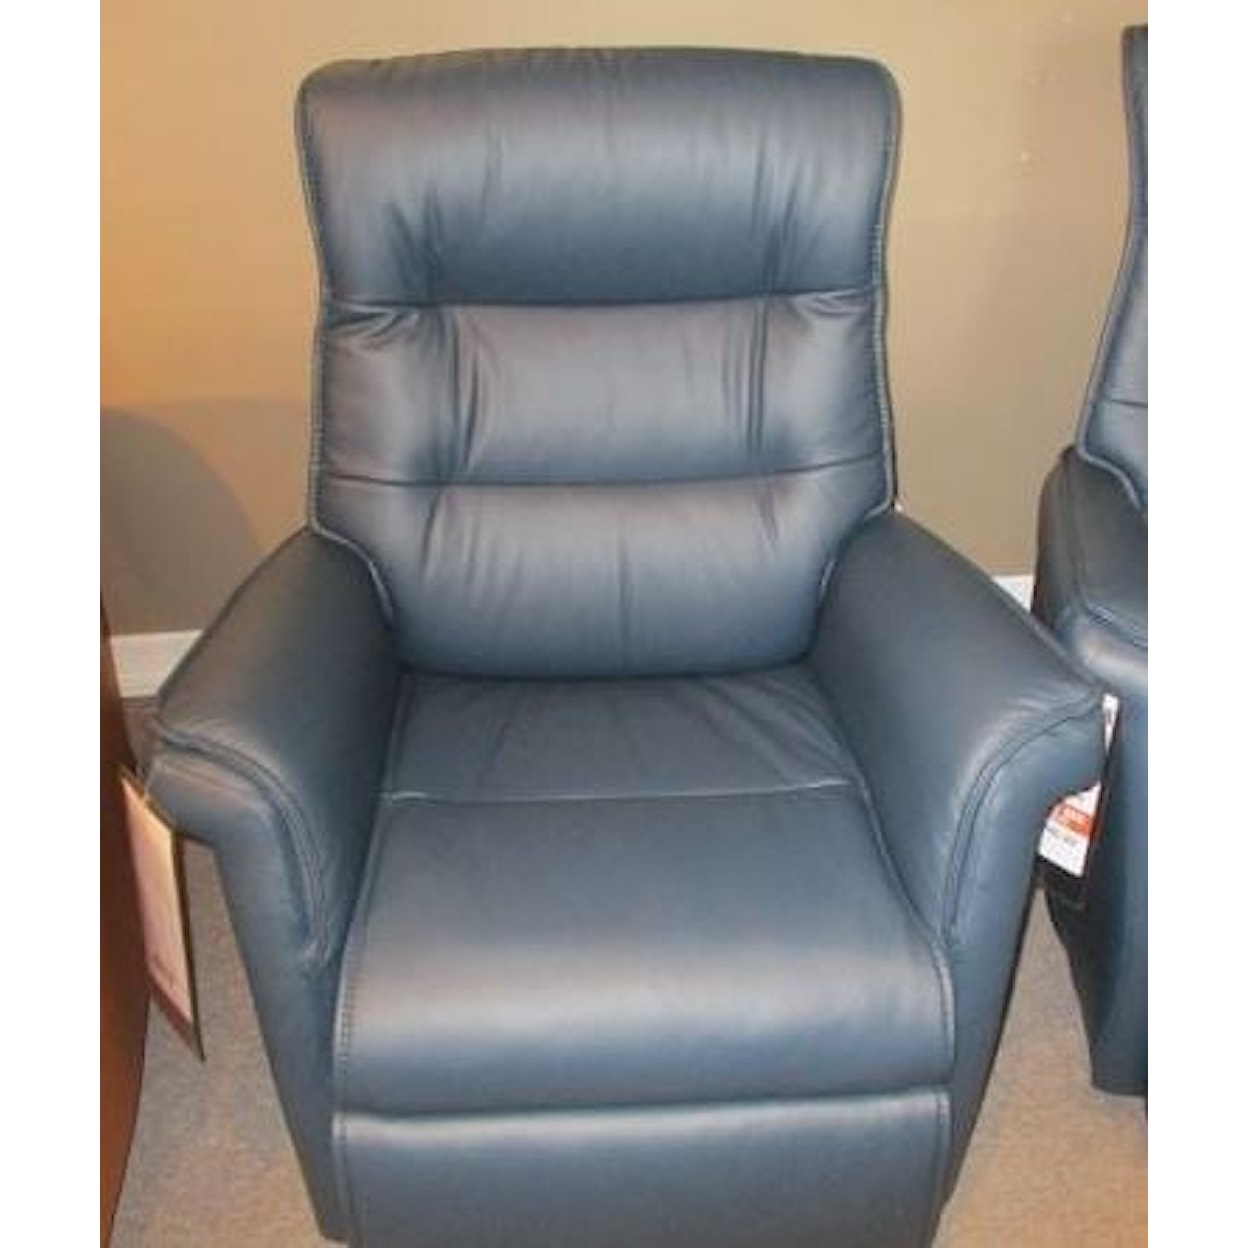 IMG Norway Chelsea Small Recliner